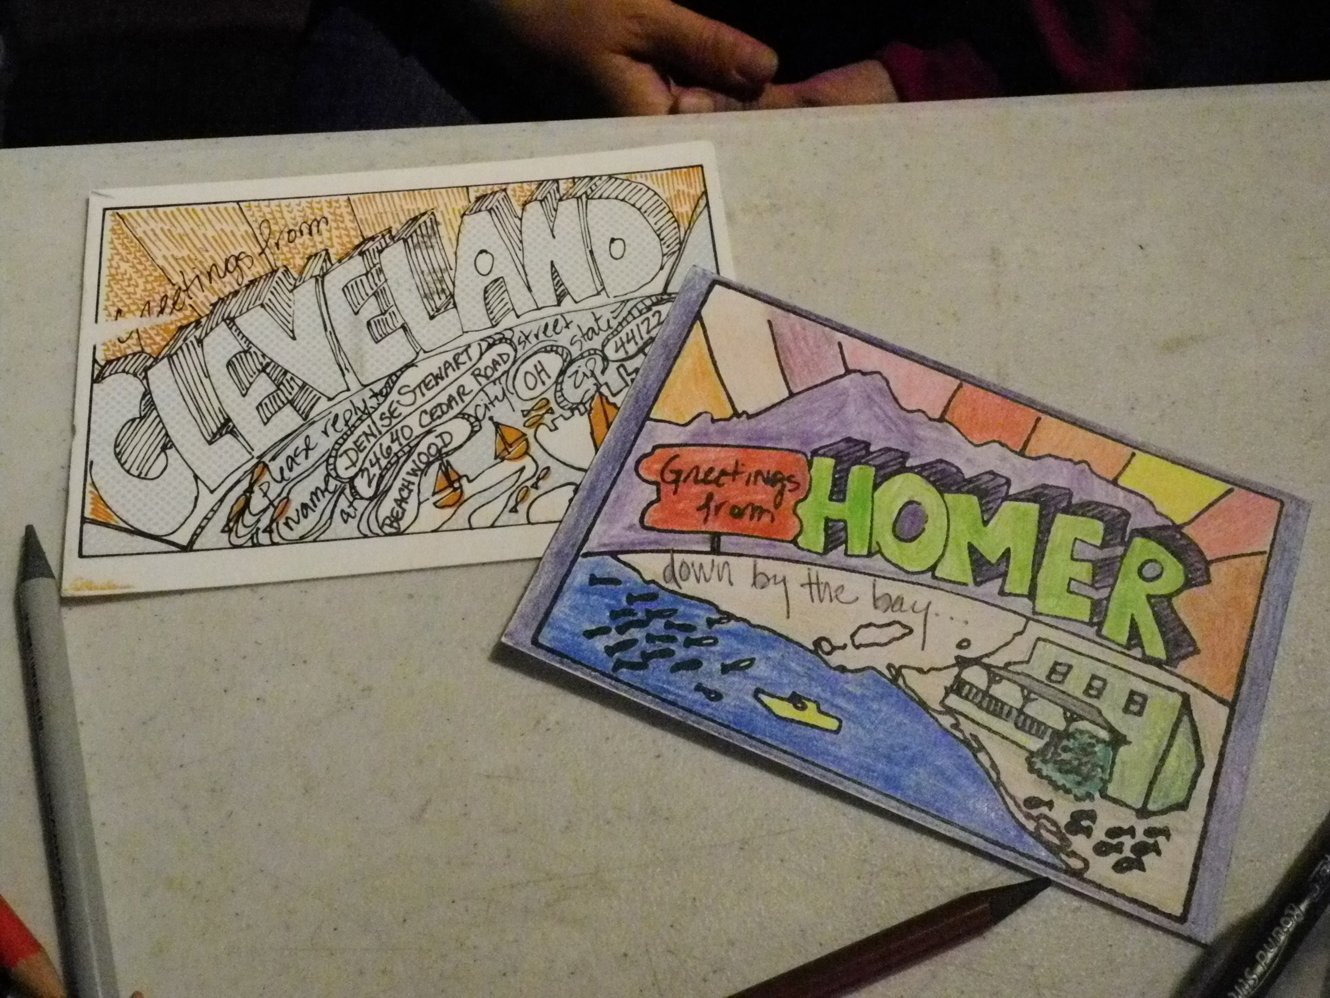 A “Greetings from Homer” postcard colored by Jenny Stroyeck of Homer is next to a Cleveland card. Emery encouraged Homer residents to visit Bunnell Street Arts Center and color Homer postcards to exchange with Cleveland area residents.-Photo by Michael Armstrong, Homer News